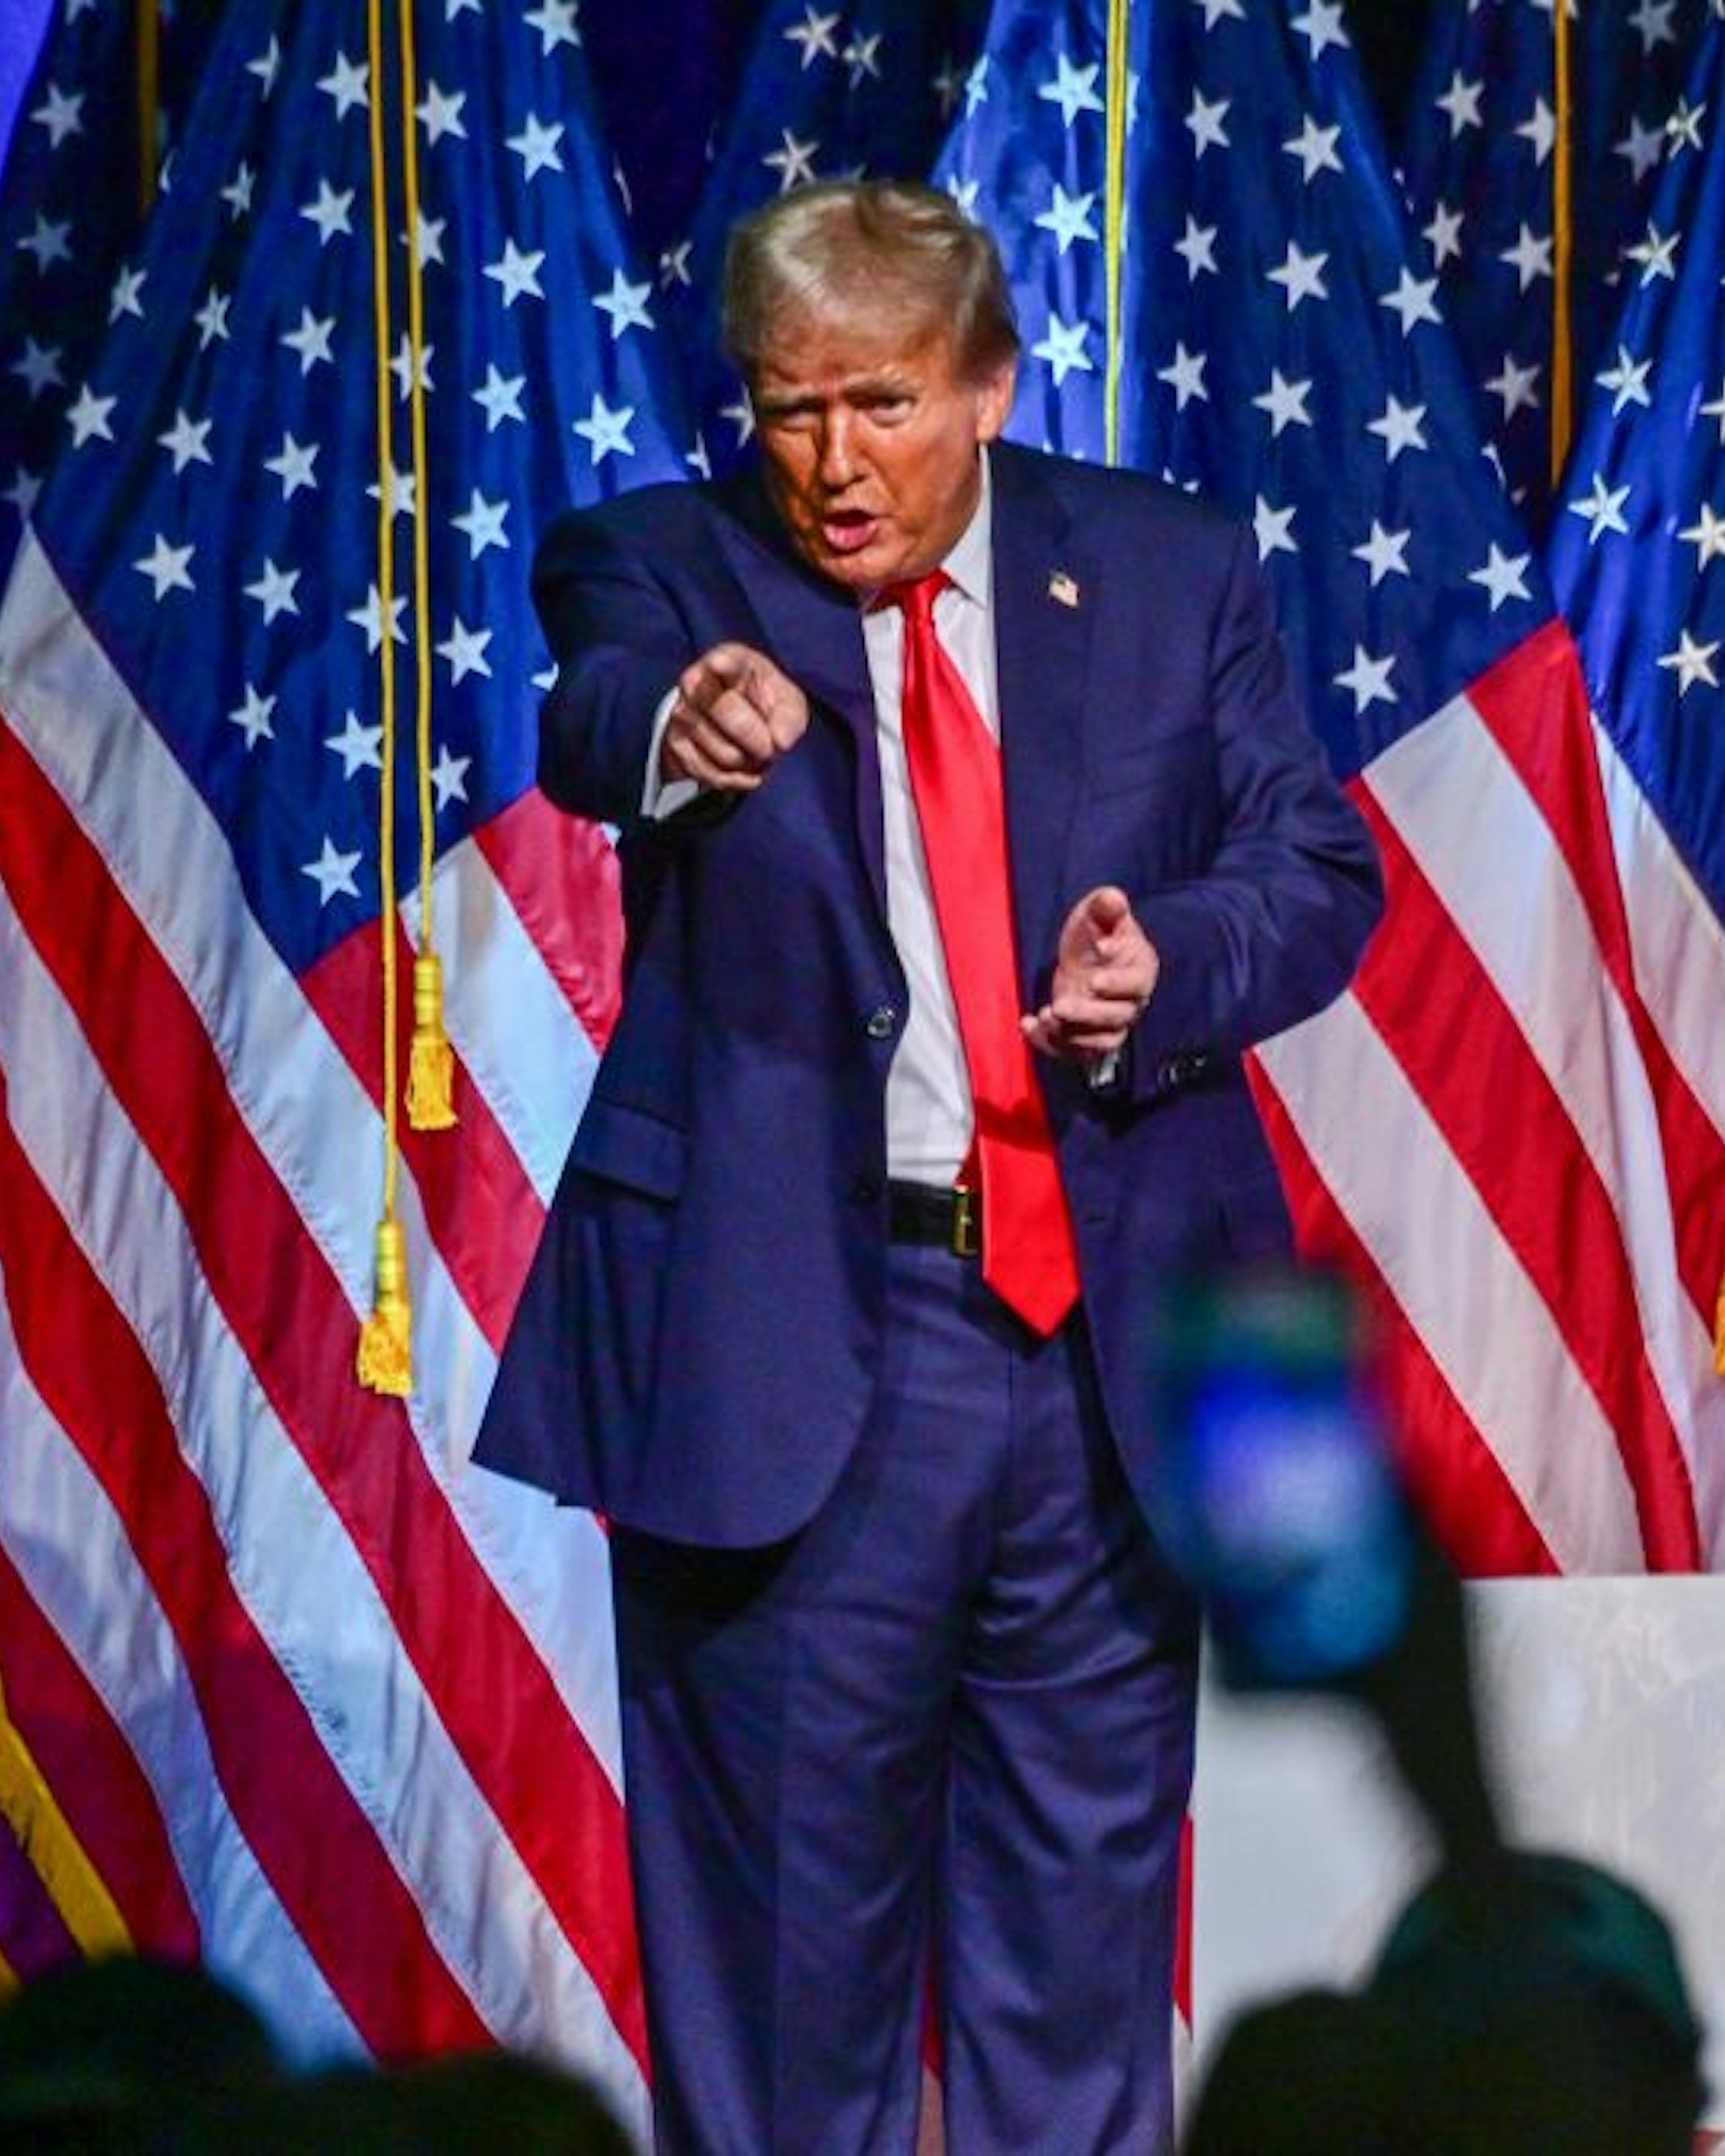 TOPSHOT - Former US President and 2024 Republican presidential hopeful Donald Trump gestures at the end of a campaign event at Club 47 USA in West Palm Beach, Florida, on October 11, 2023. (Photo by GIORGIO VIERA / AFP) (Photo by GIORGIO VIERA/AFP via Getty Images)